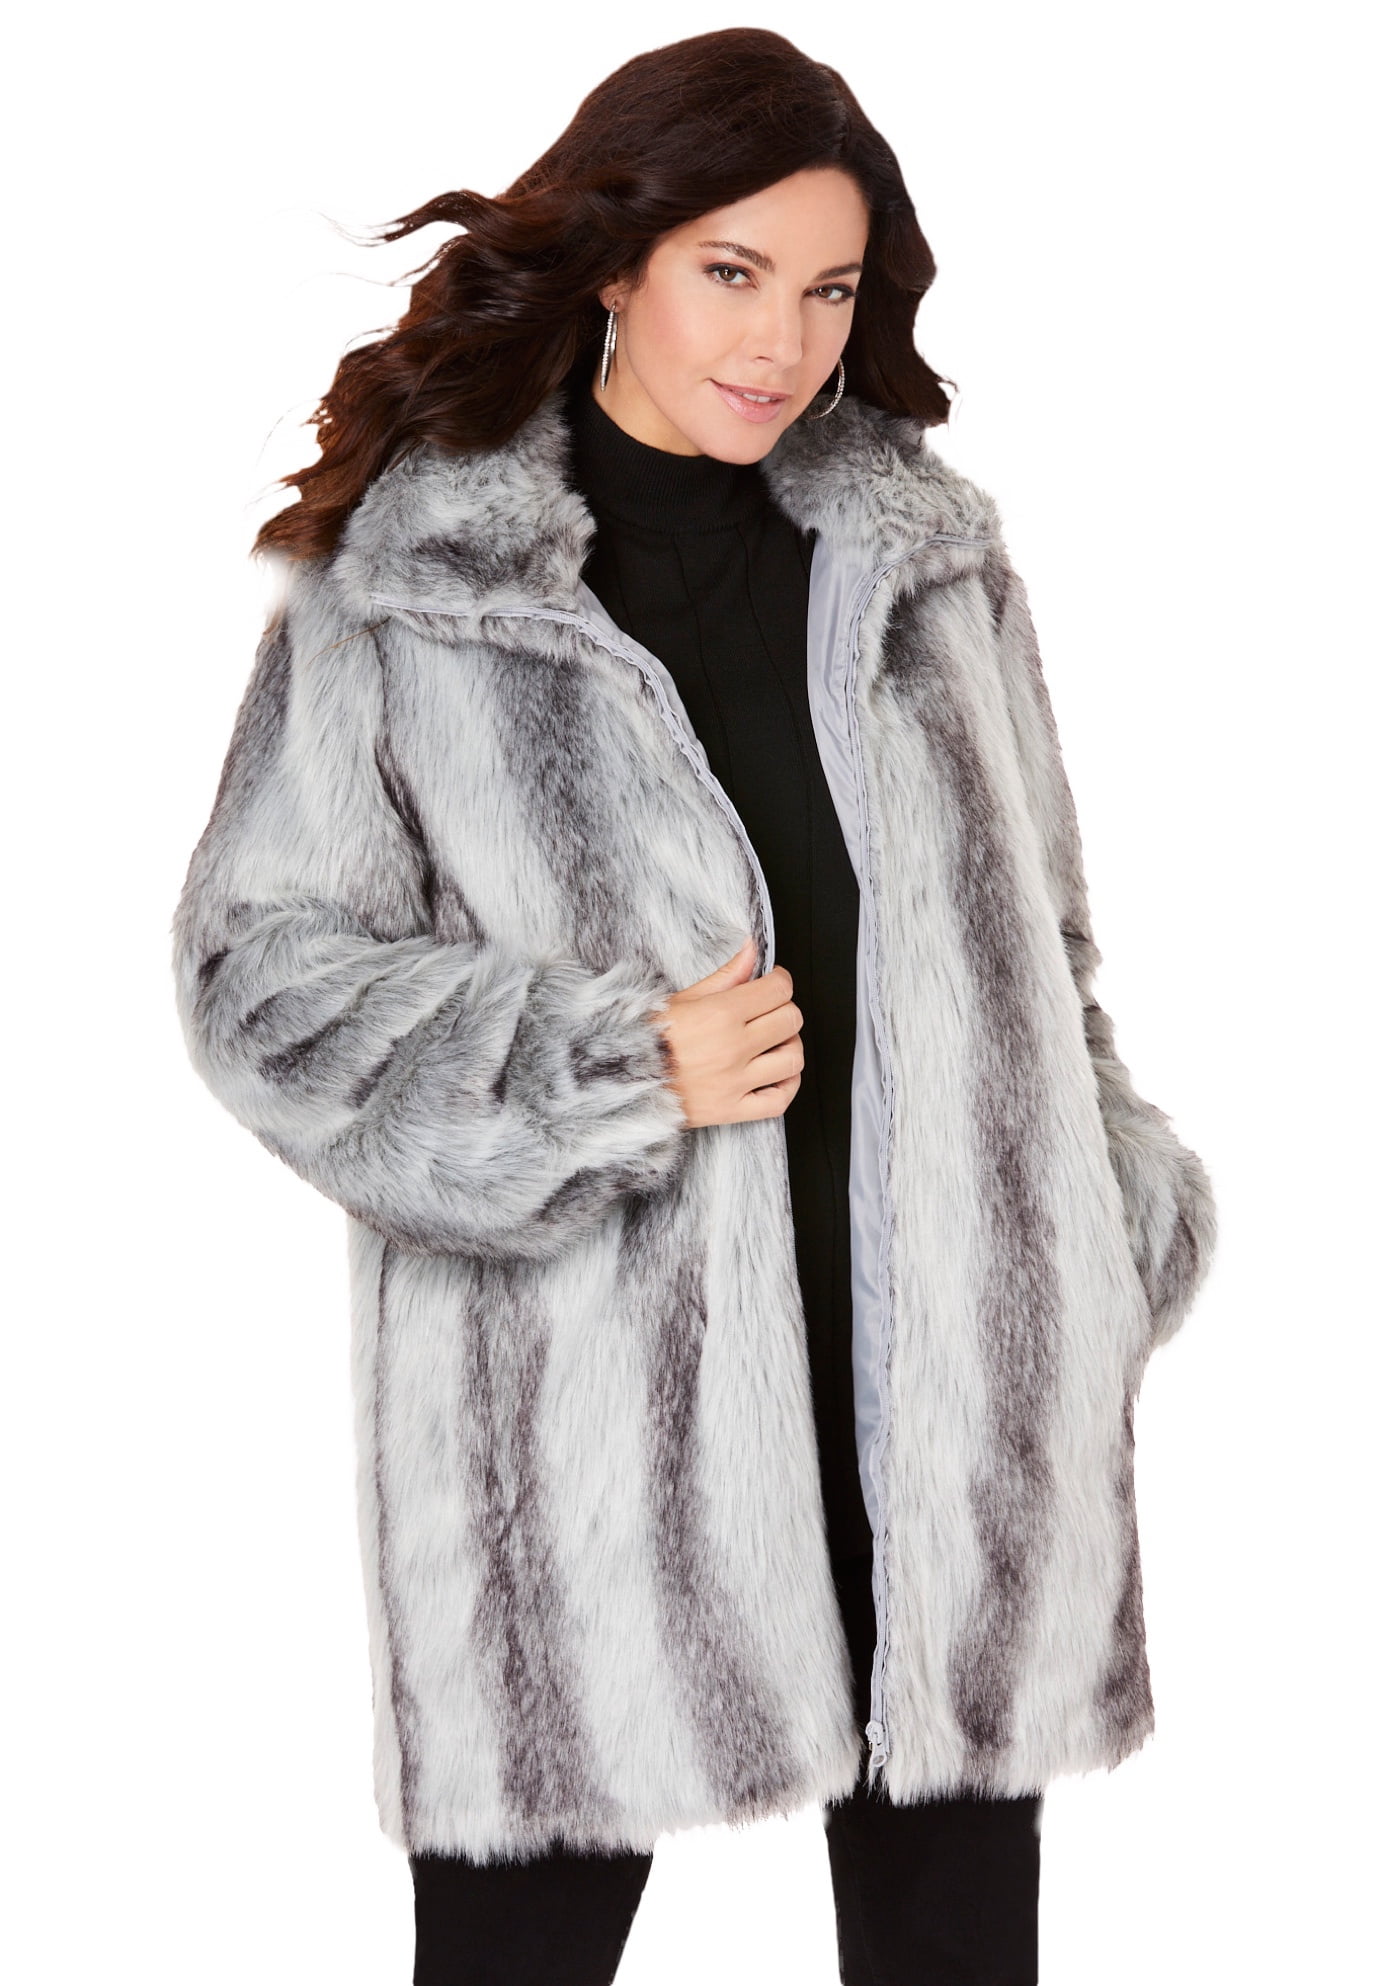 Tanming Womens Winter Warm Stand Collar Mid Long Faux Fur Coats with Belt